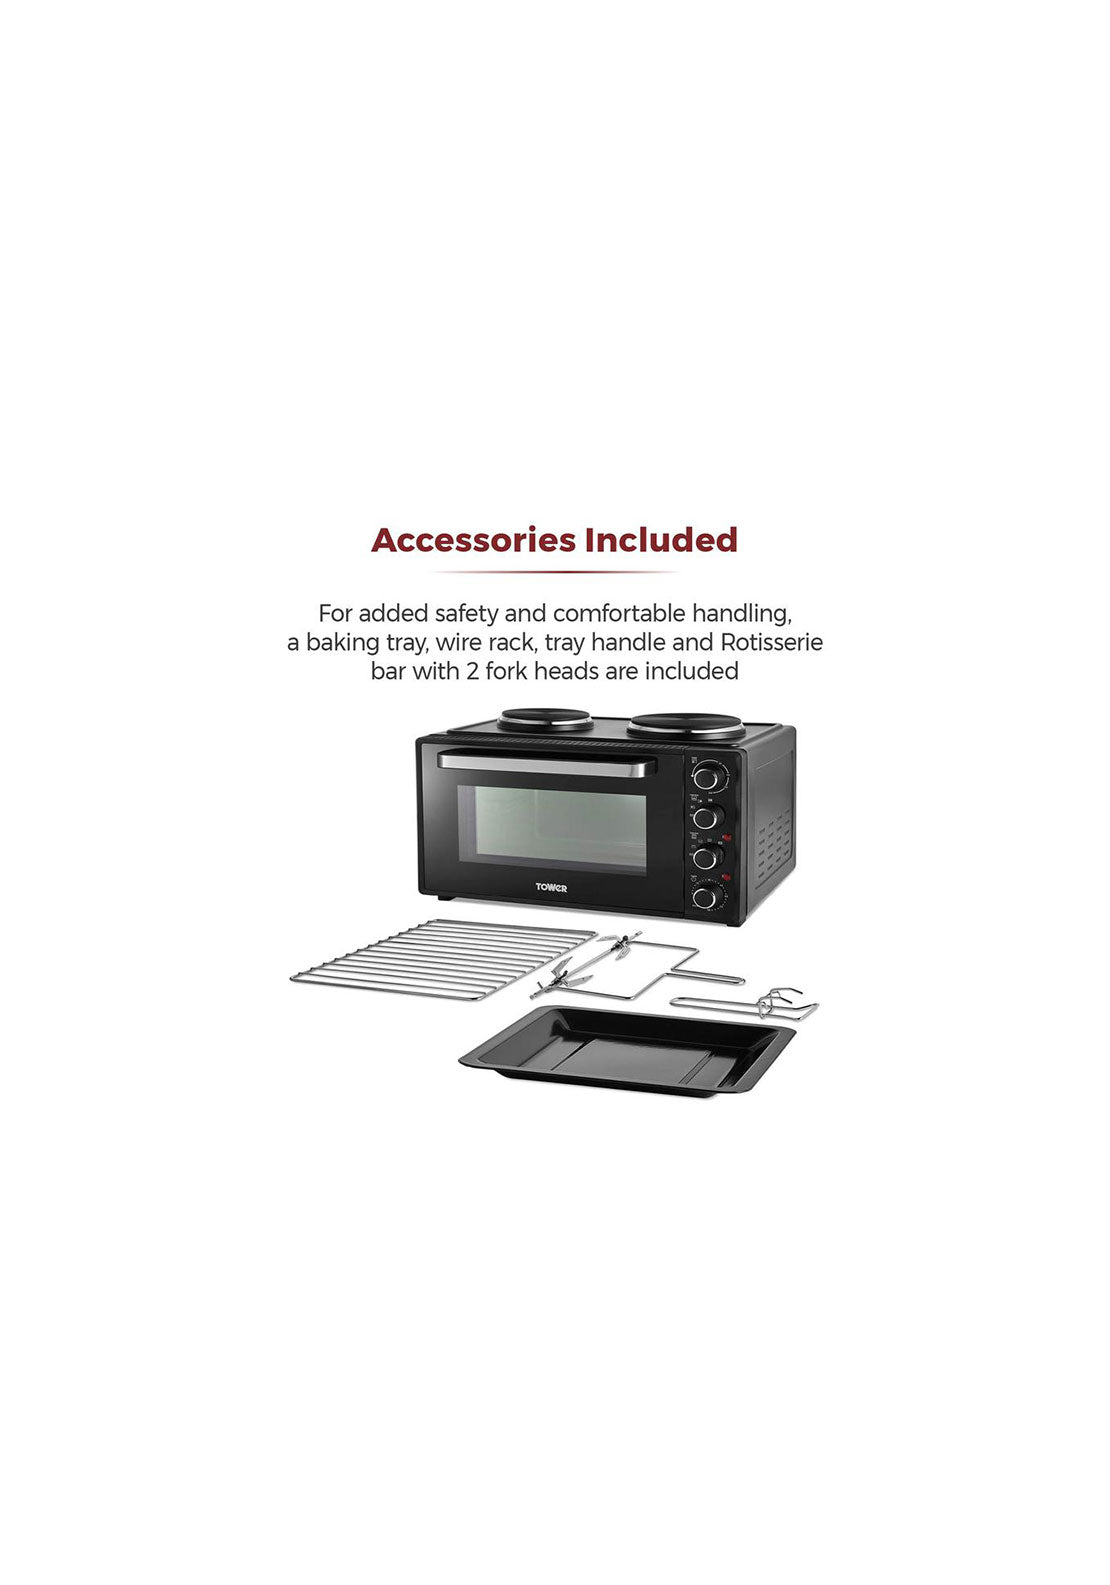 Tower 42L Mini Oven With Hot Plates | T14045 5 Shaws Department Stores